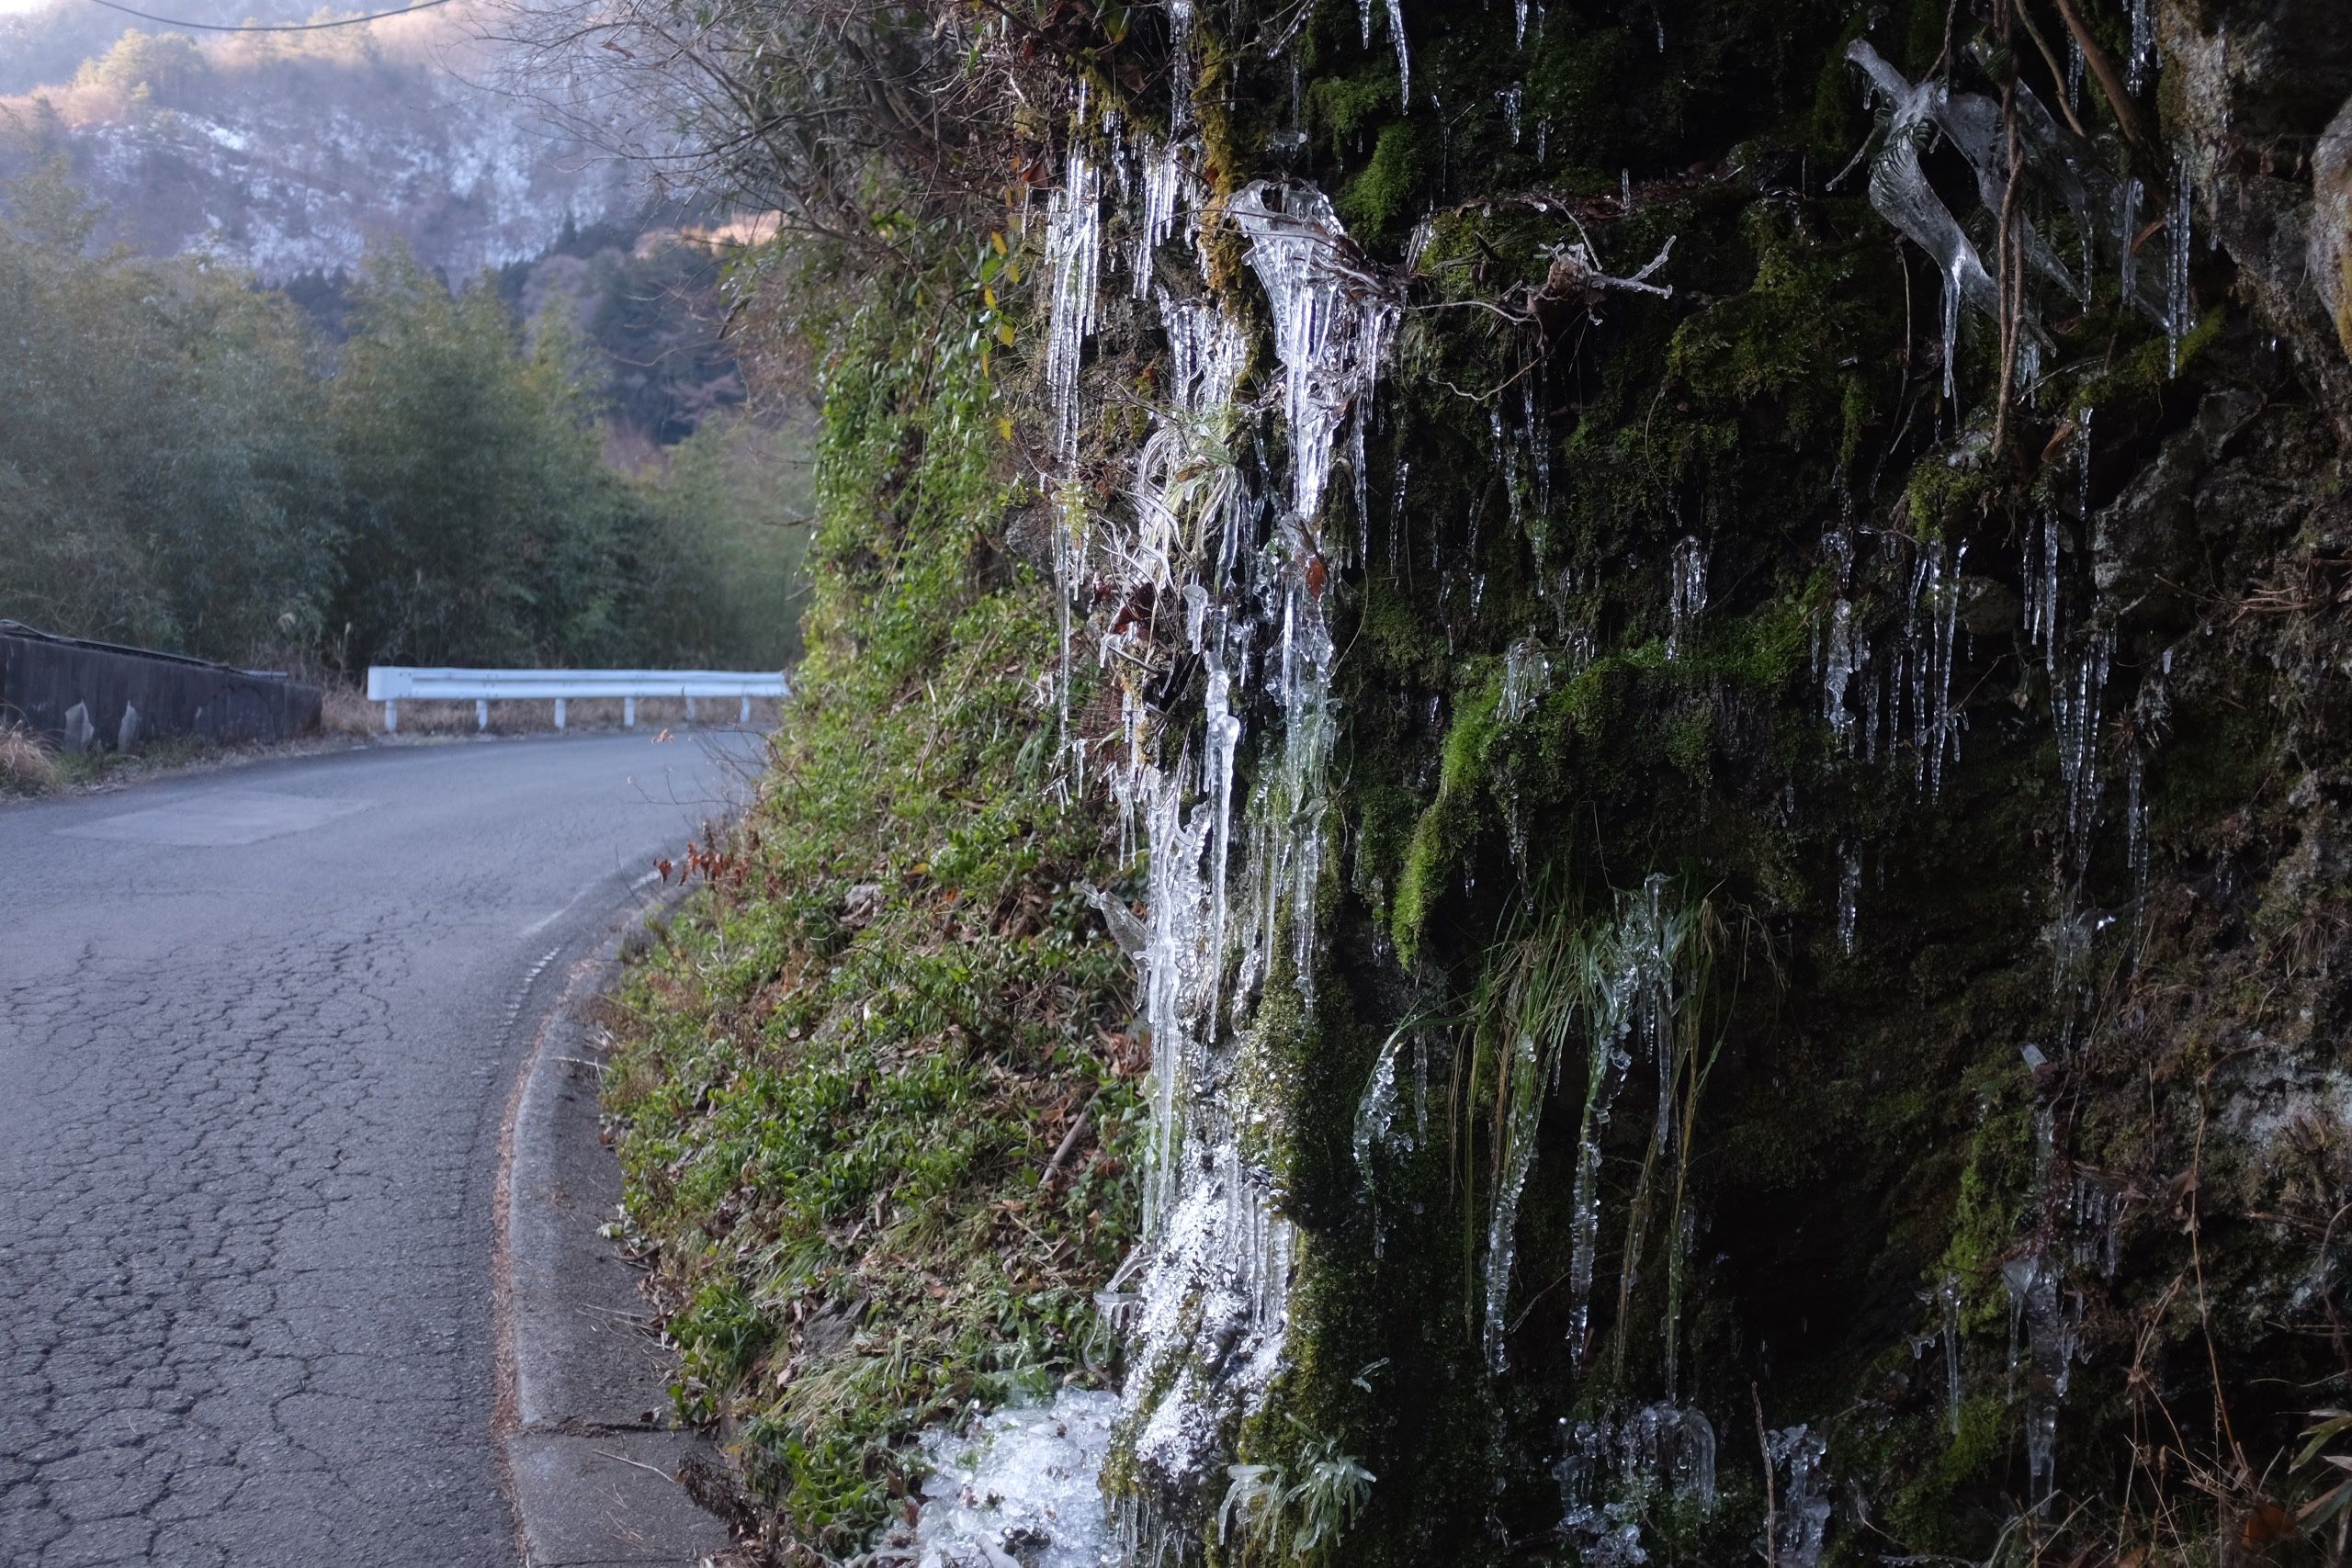 Many icicles on a carpet of moss by the side of a narrow mountain road.